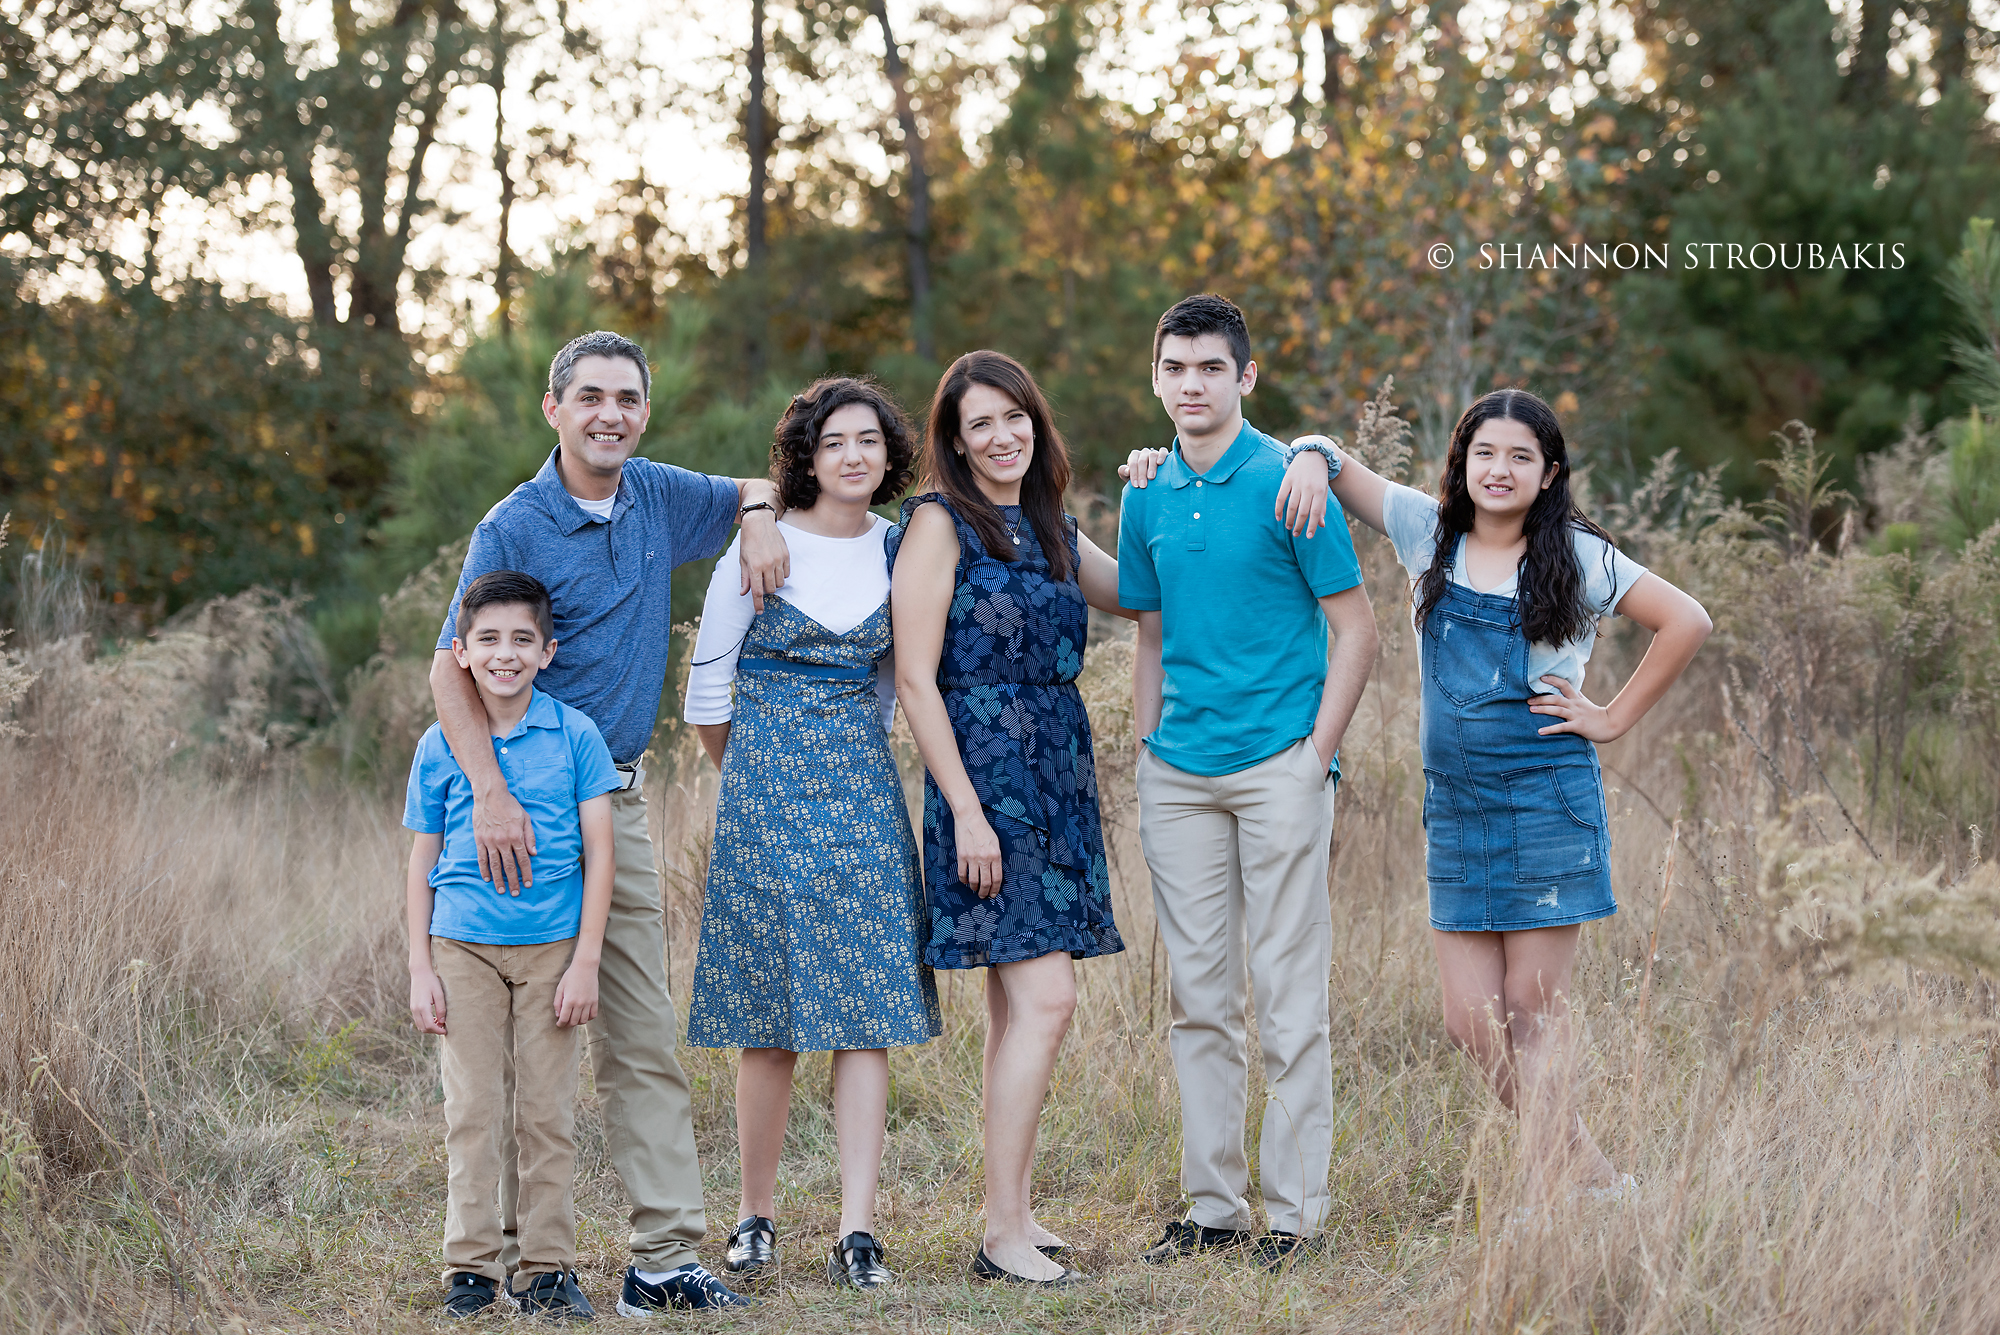 What to wear for your upcoming family portrait - Brant Bender Photography